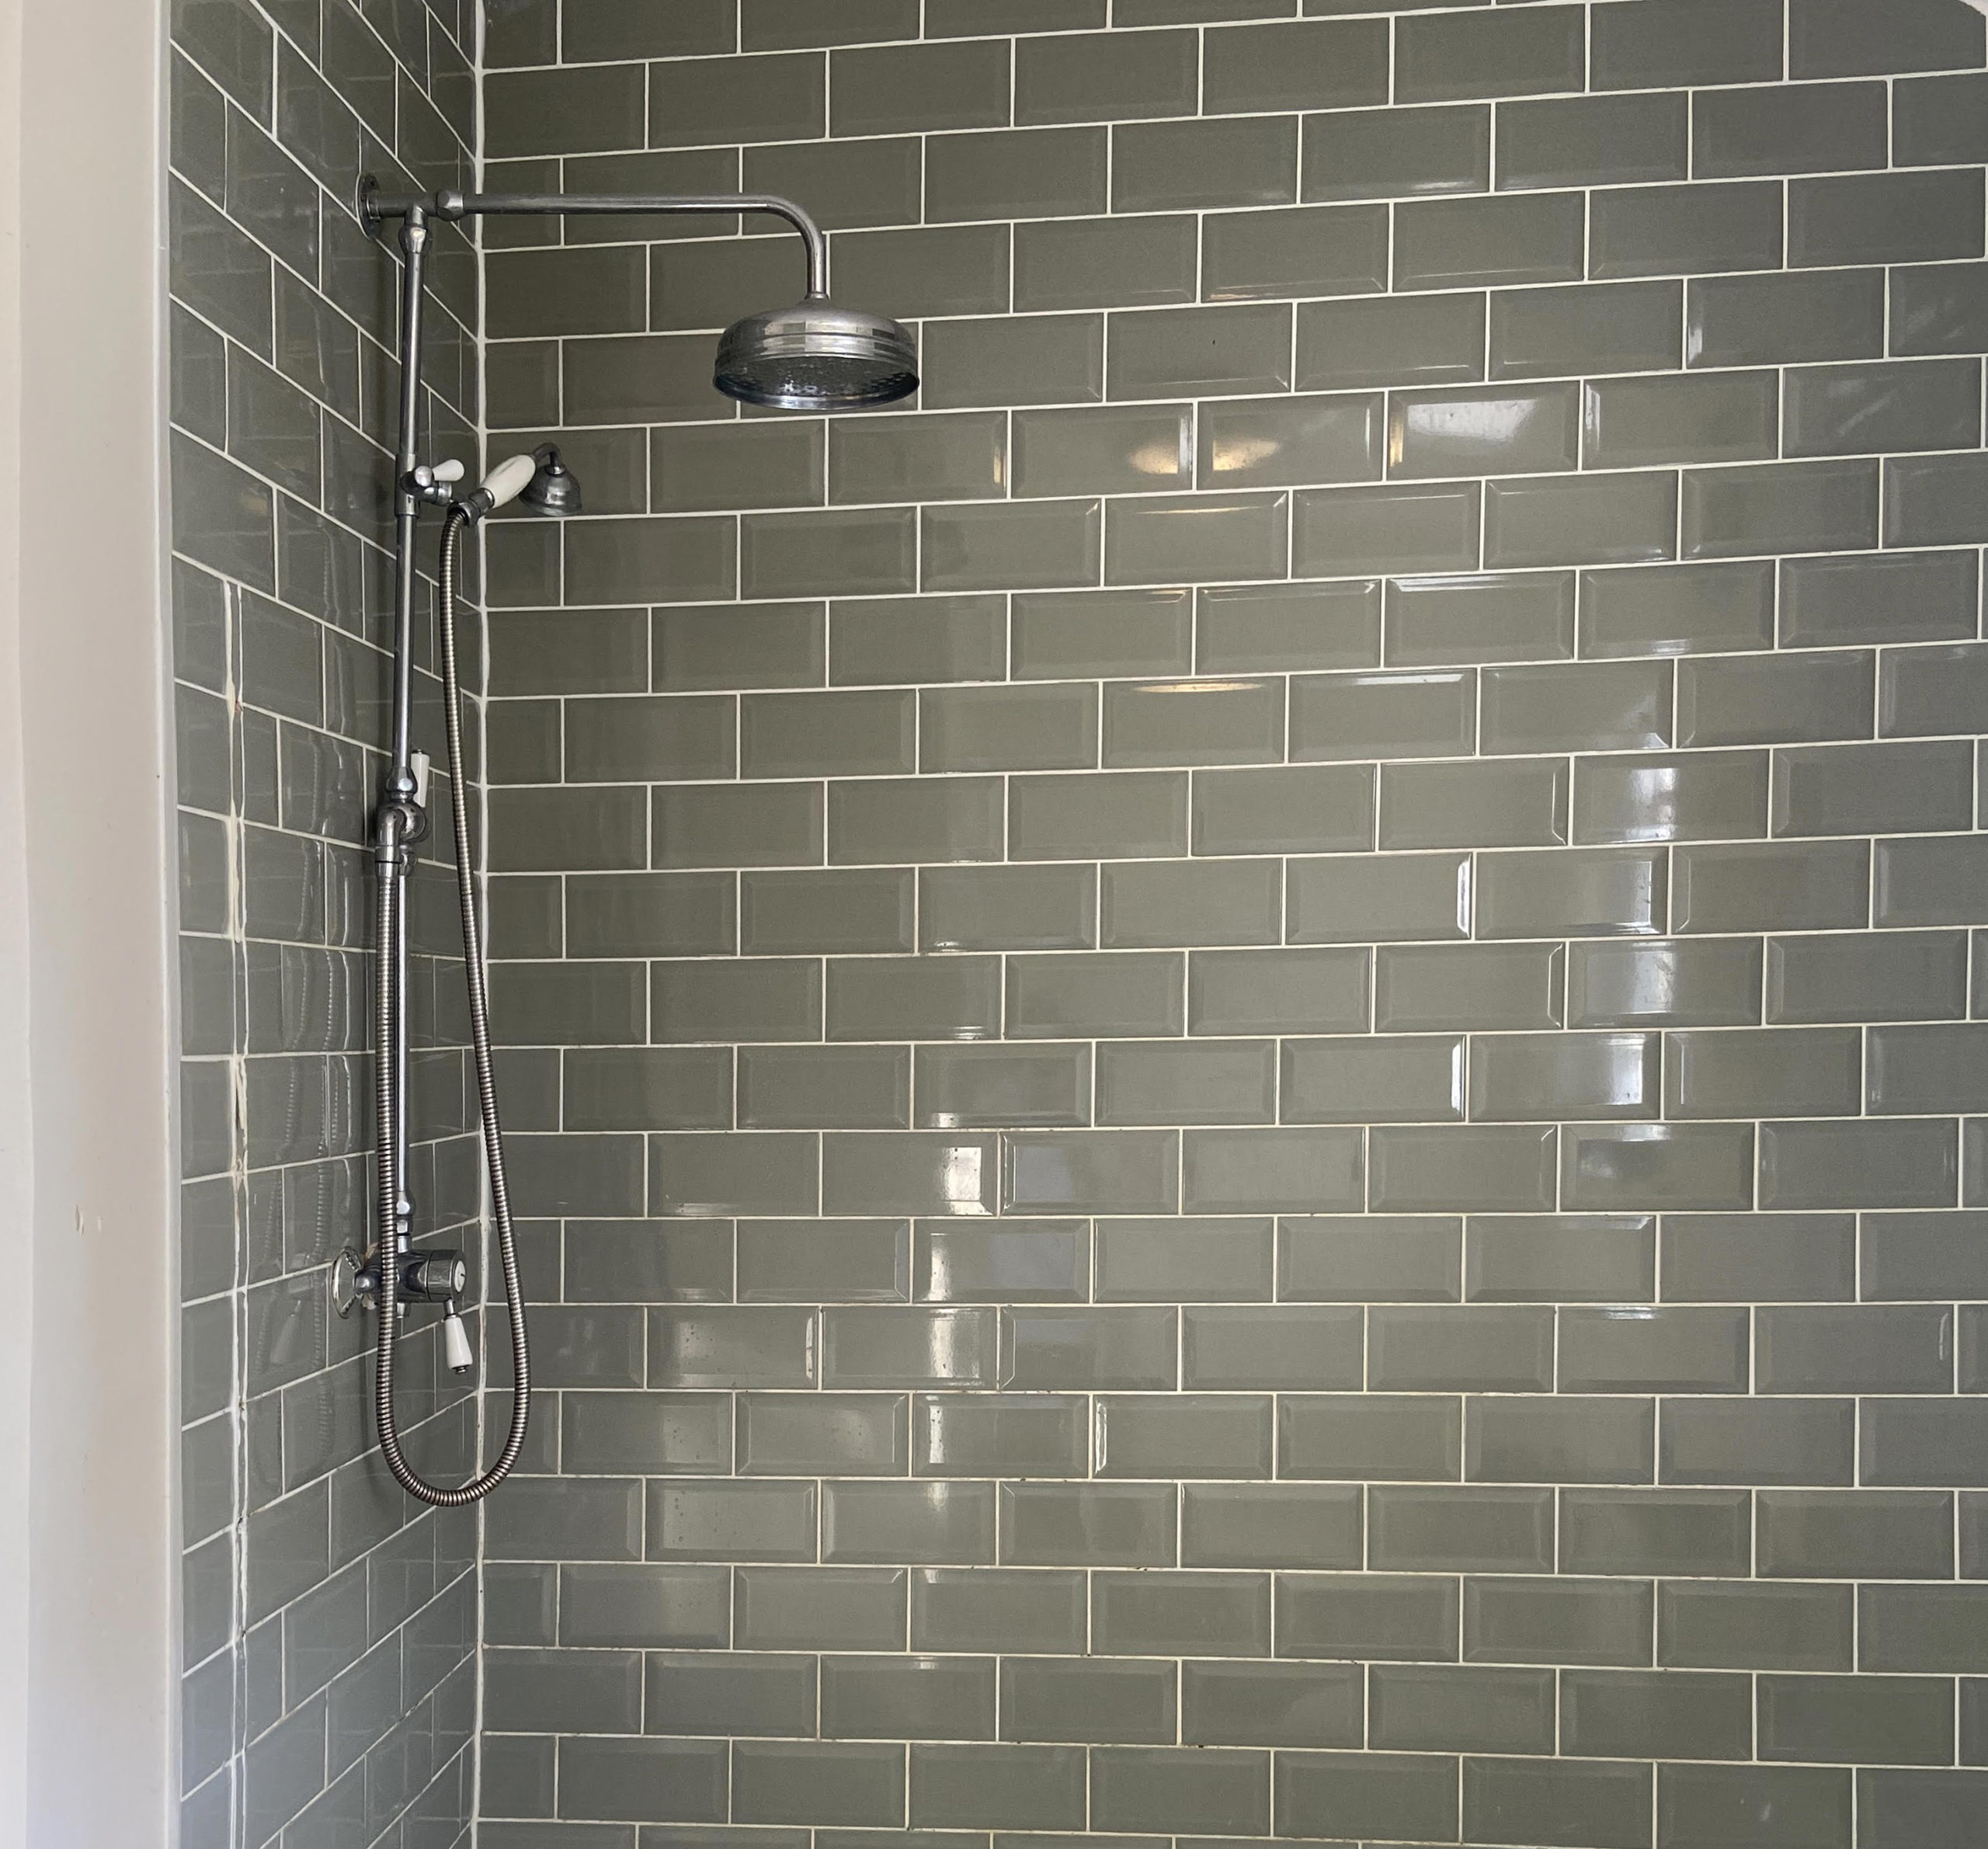 New tiling to wall in grey